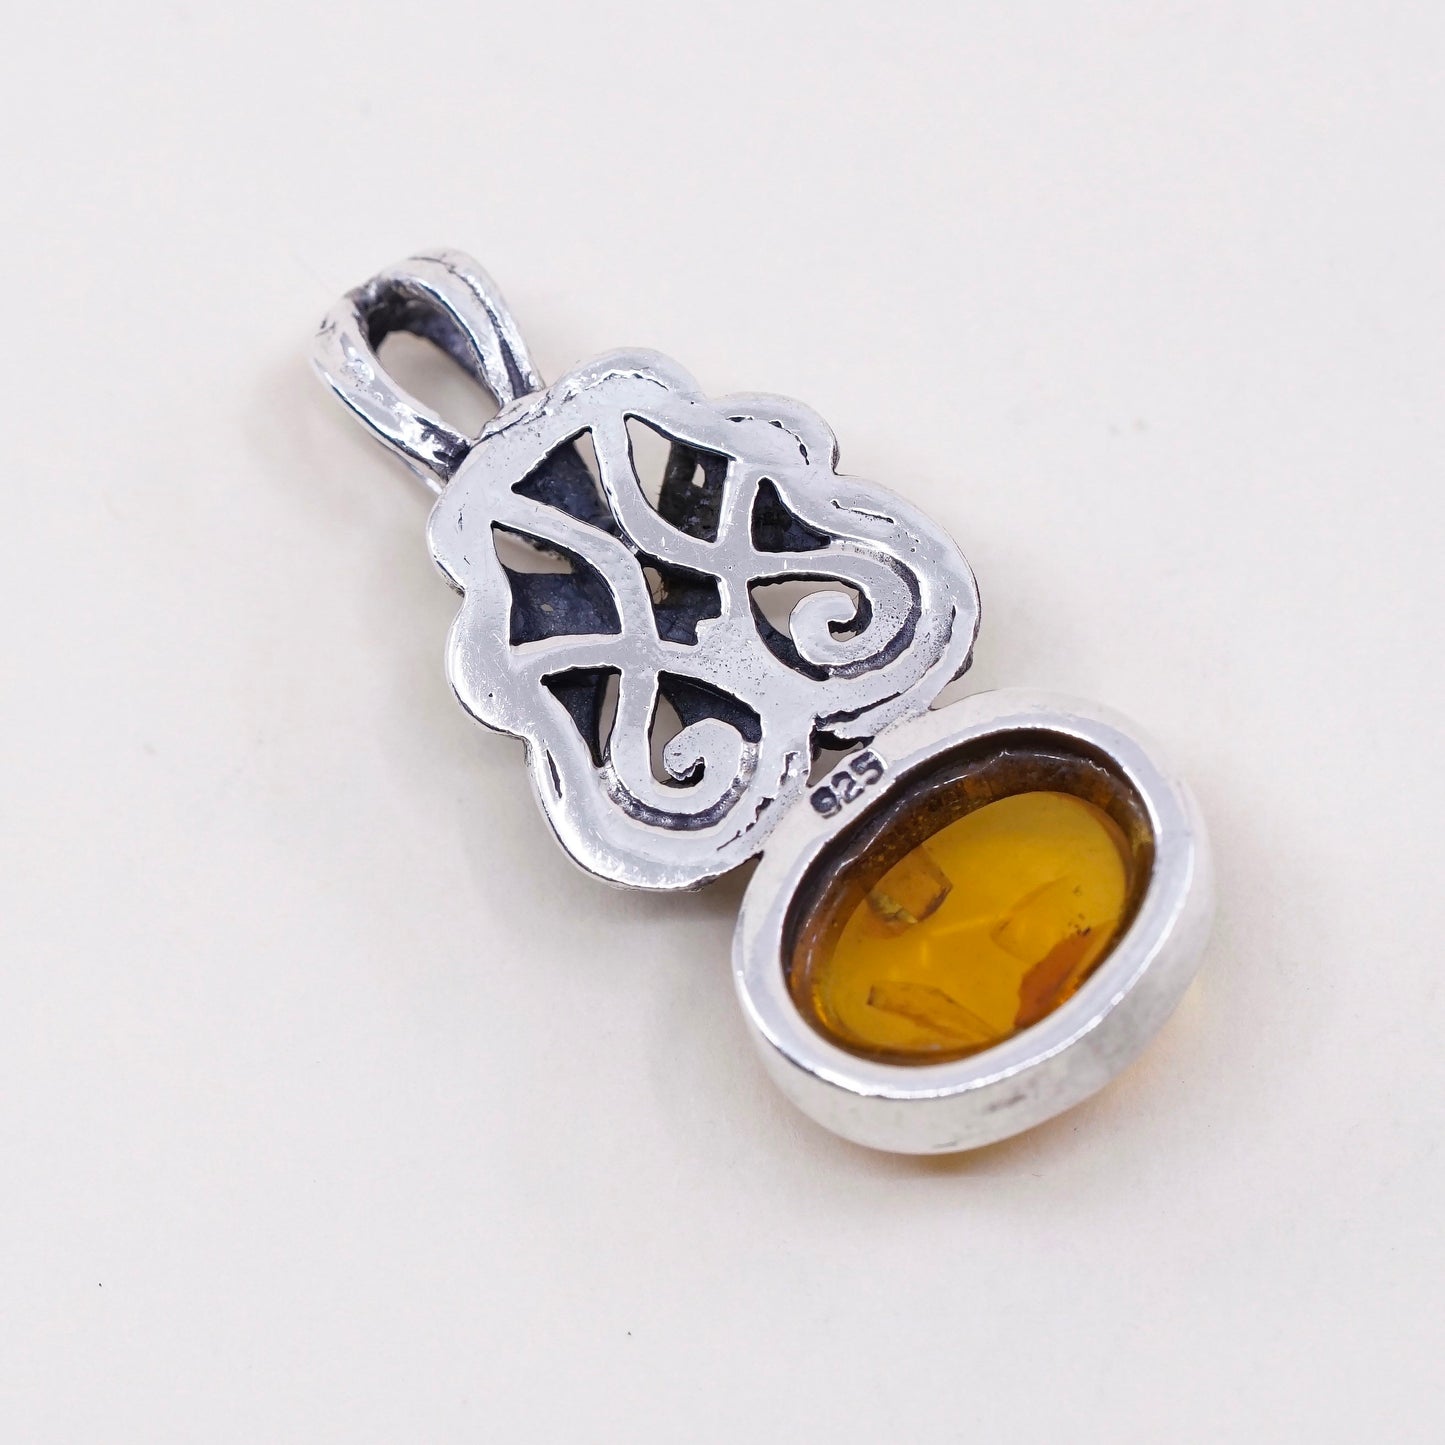 Vintage sterling 925 silver handmade pendant with oval amber and beads around